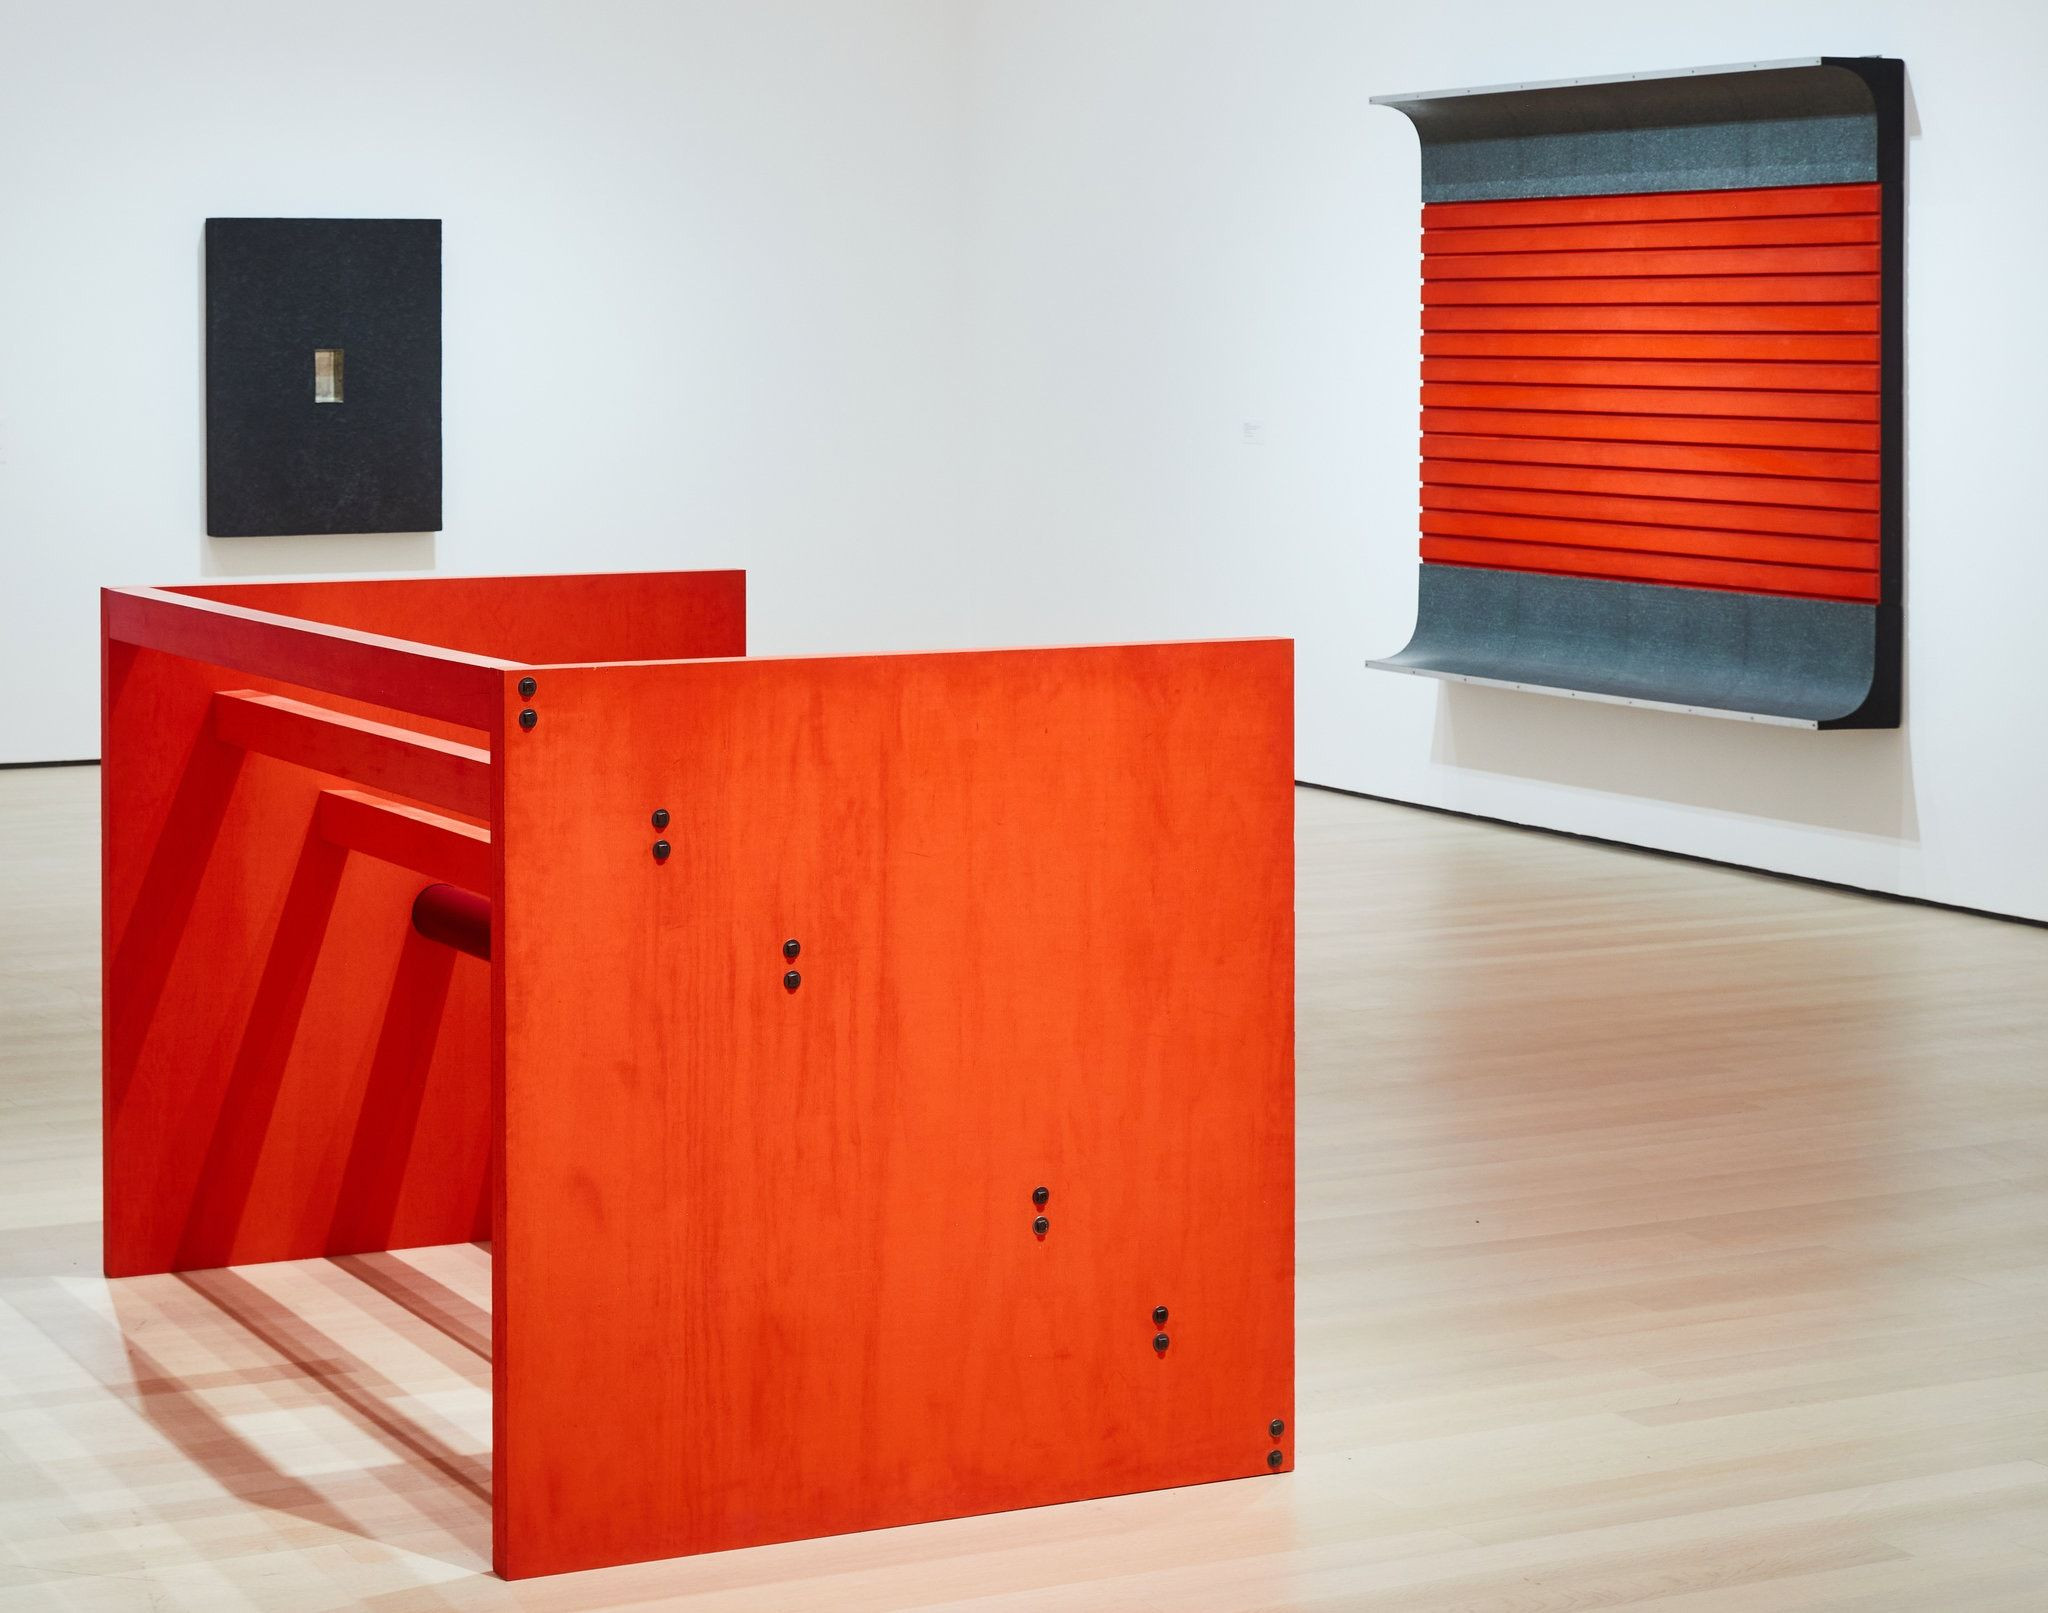 An installation view showing, in the foreground, “Untitled” (1963/1975); one of Judd’s earliest experimental objects (from 1961), left, with a baking pan sunk in its surface; and, right, a 1963 piece that shows him playing with space. Donald Judd Art; Judd Foundation/Artists Rights Society (ARS), New York; Zack DeZon for The New York Times